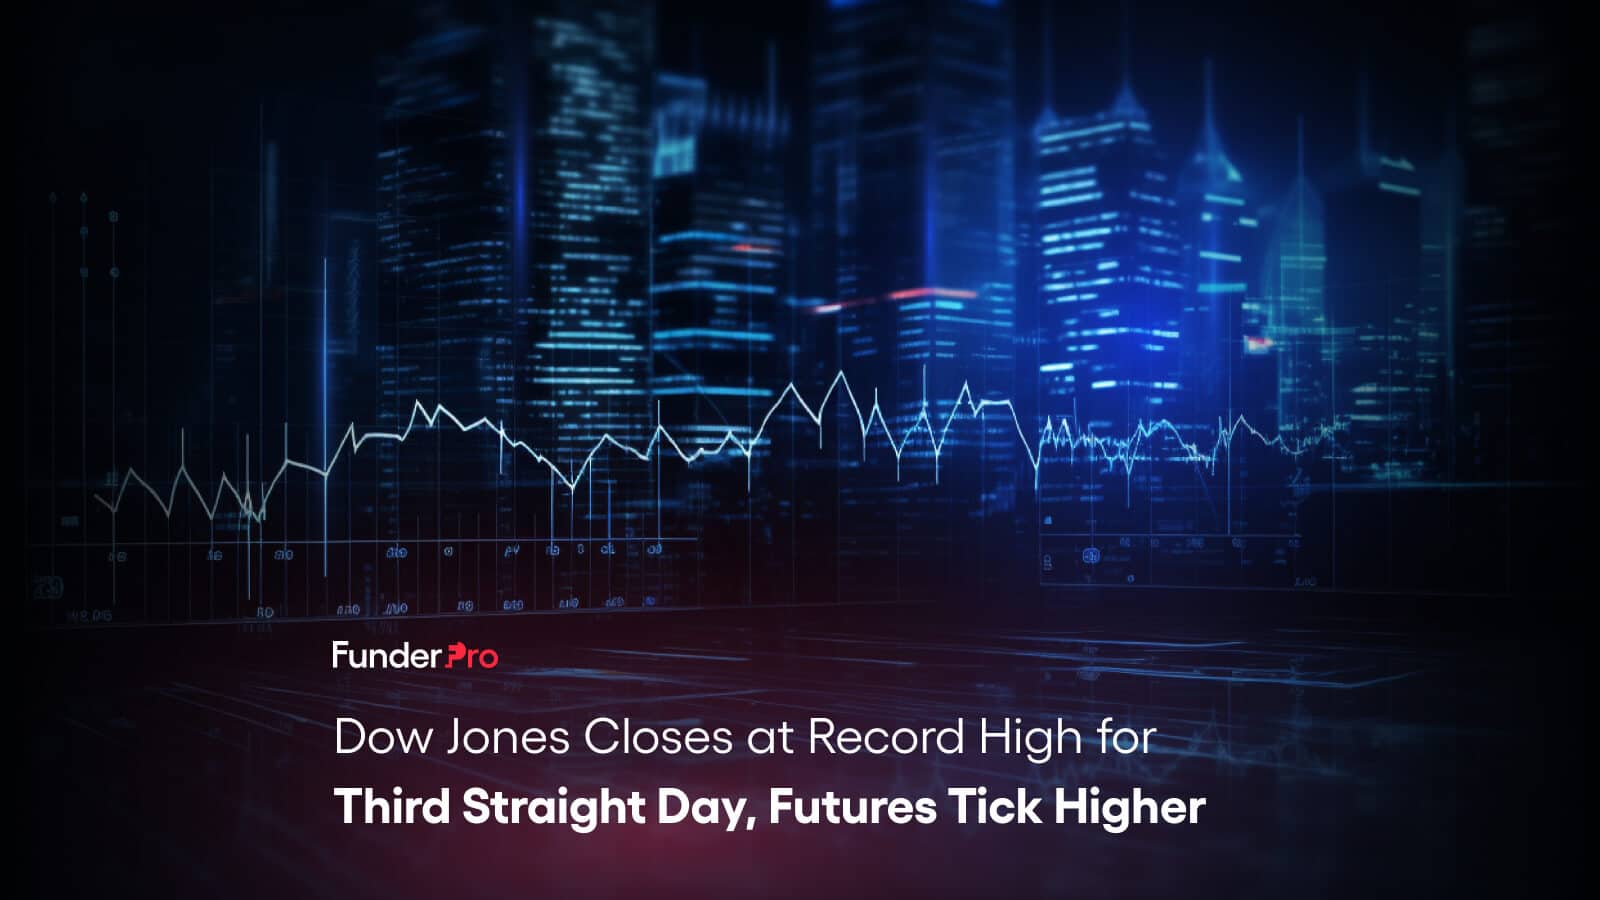 The Dow Jones was up for a third day in a row on Friday and futures contracts pointed to more gains on Monday.